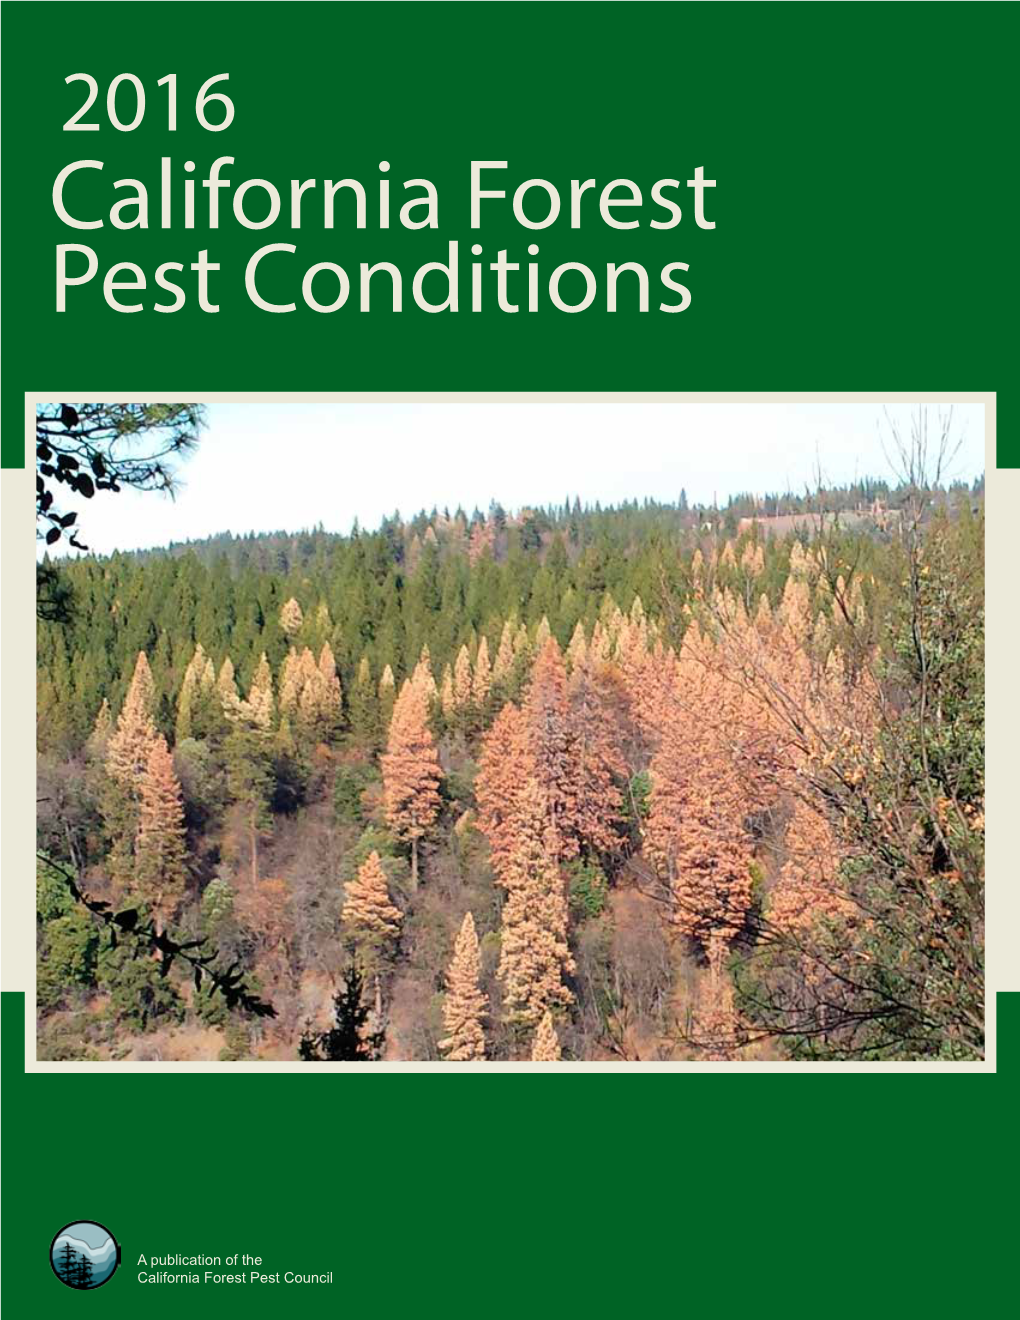 Forest Pest Conditions in California, 2016